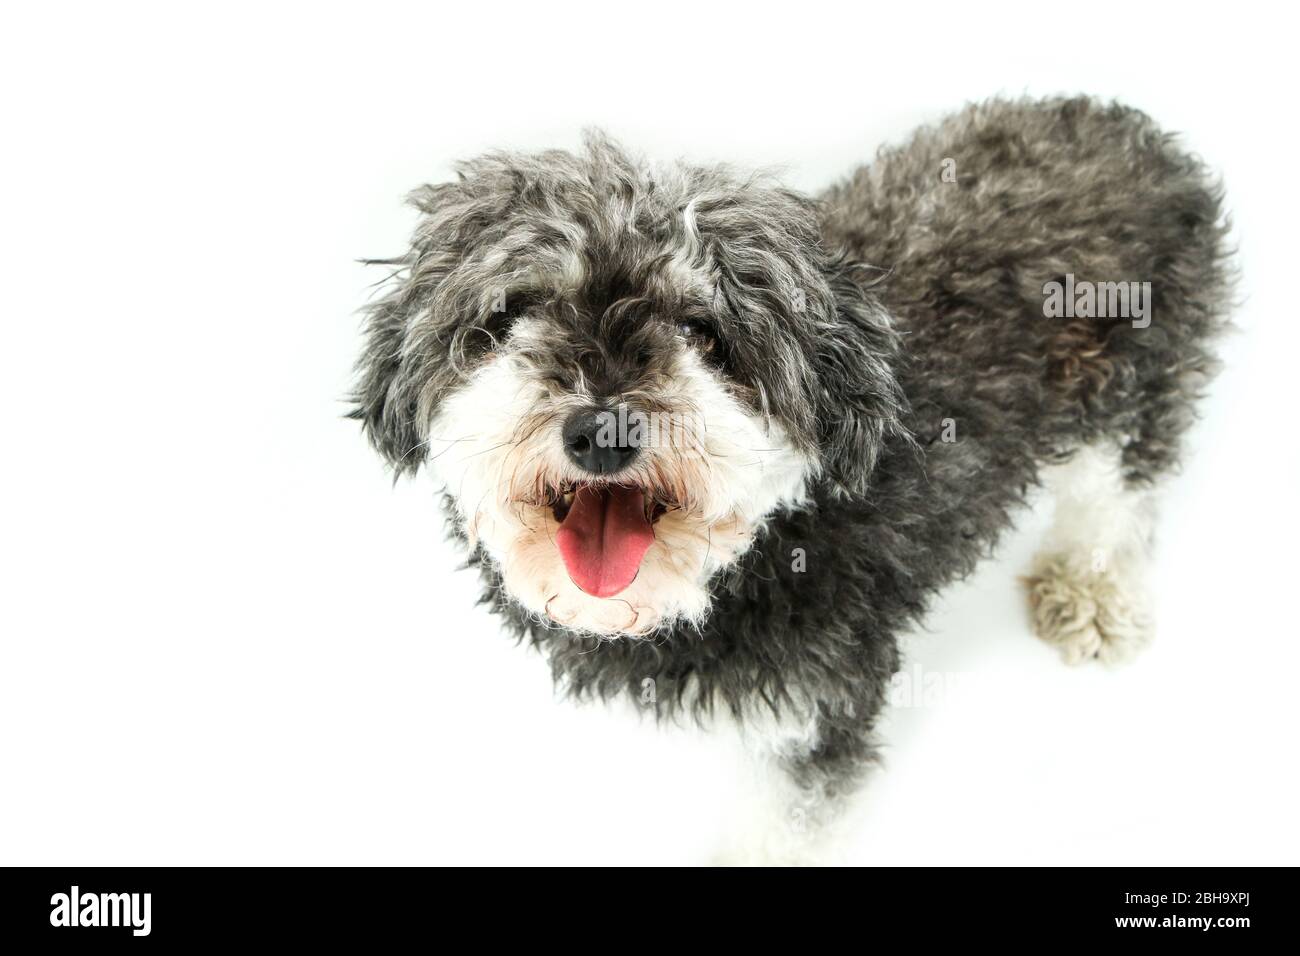 The cute crossbreed of shi tzu and poodle looking shy and obedient. Stock Photo